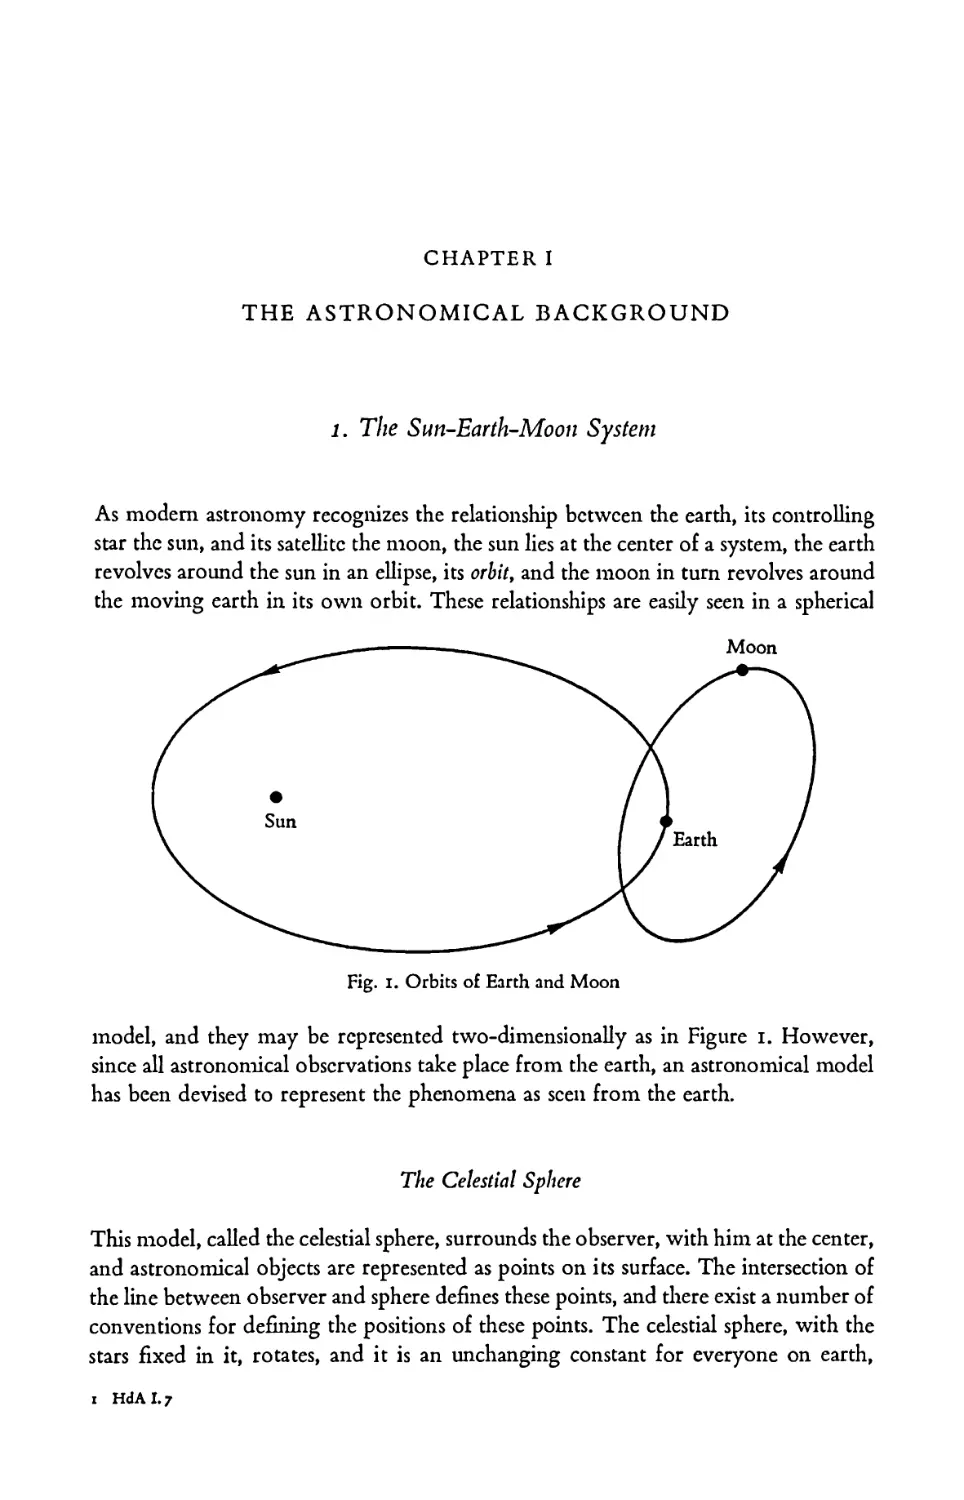 CHAPTER I. THE ASTRONOMICAL BACKGROUND